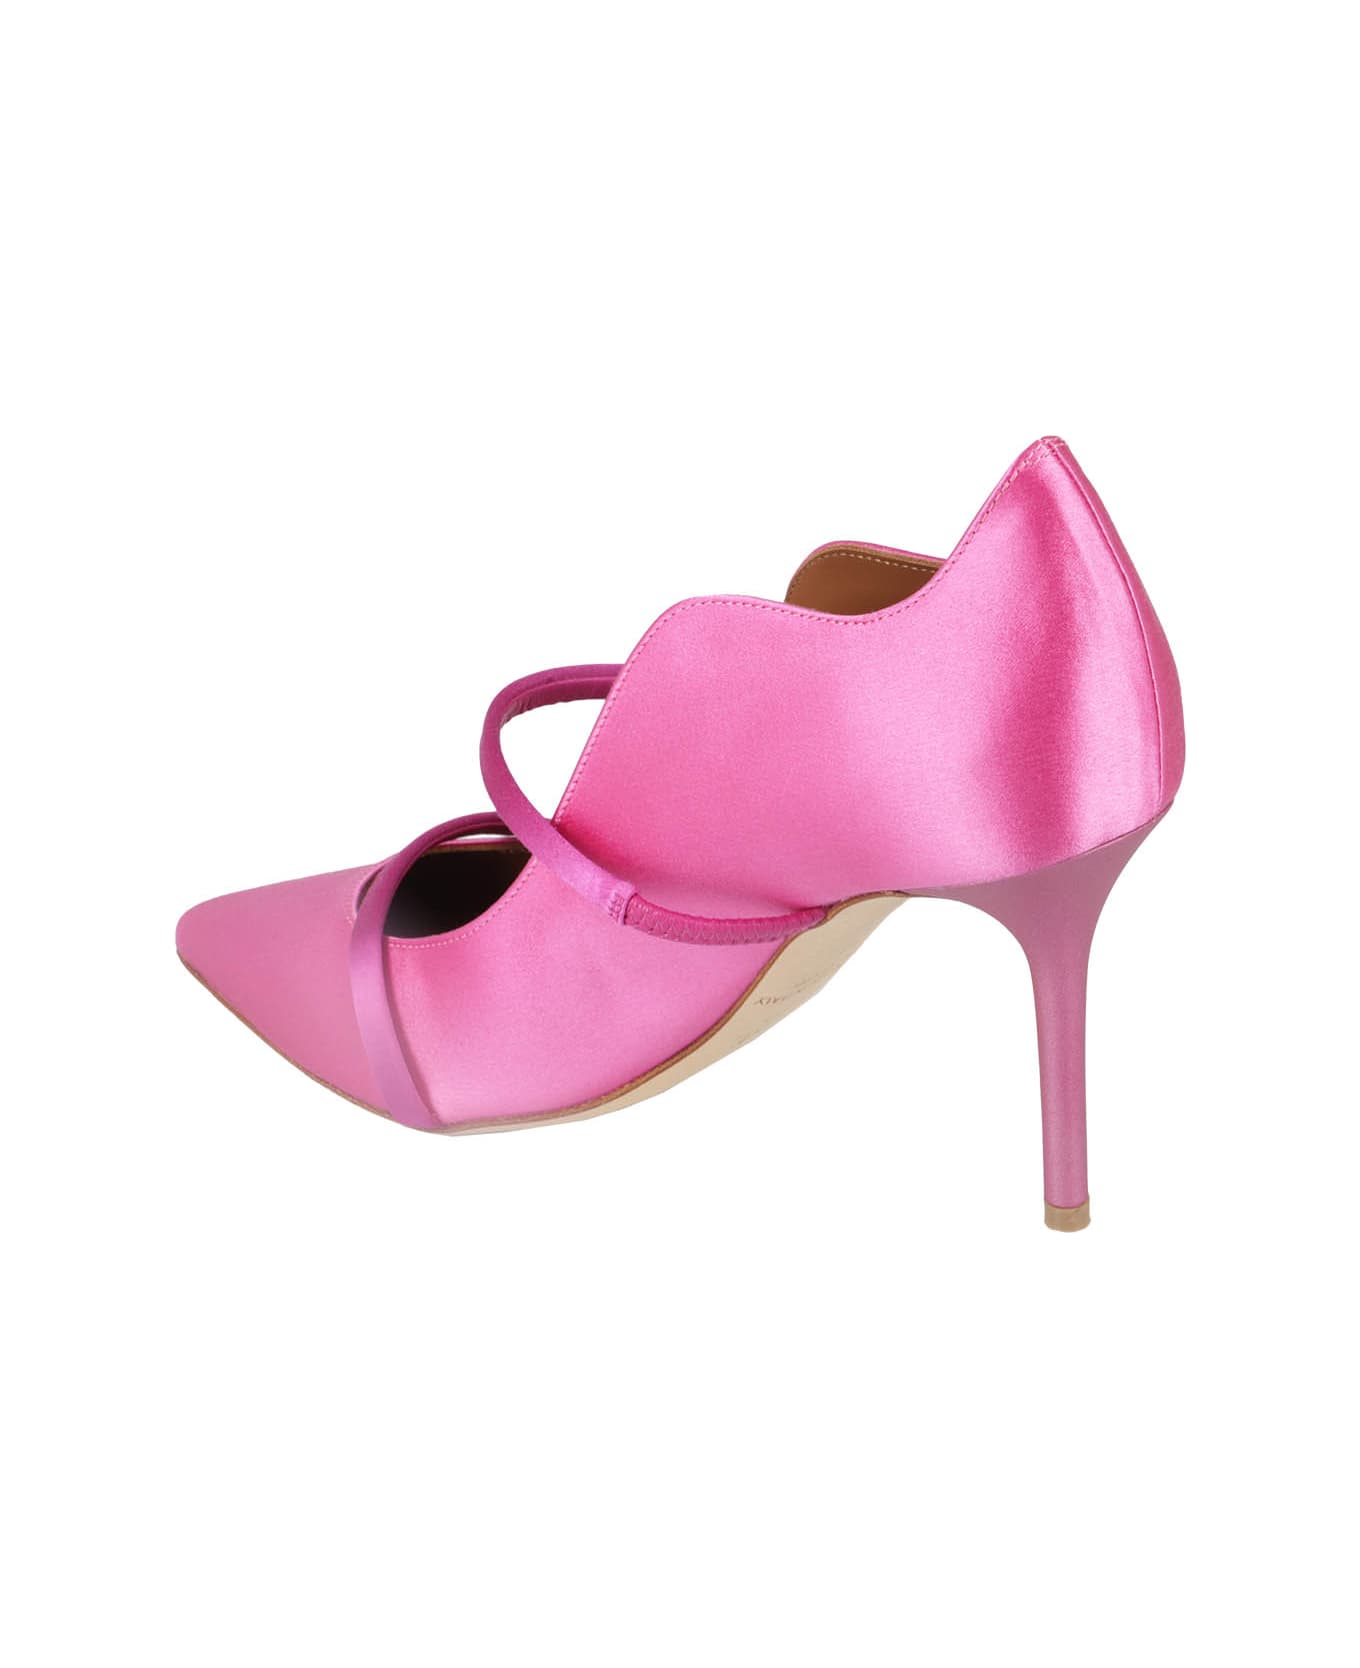 Malone Souliers Satin - Pink Berry ハイヒール